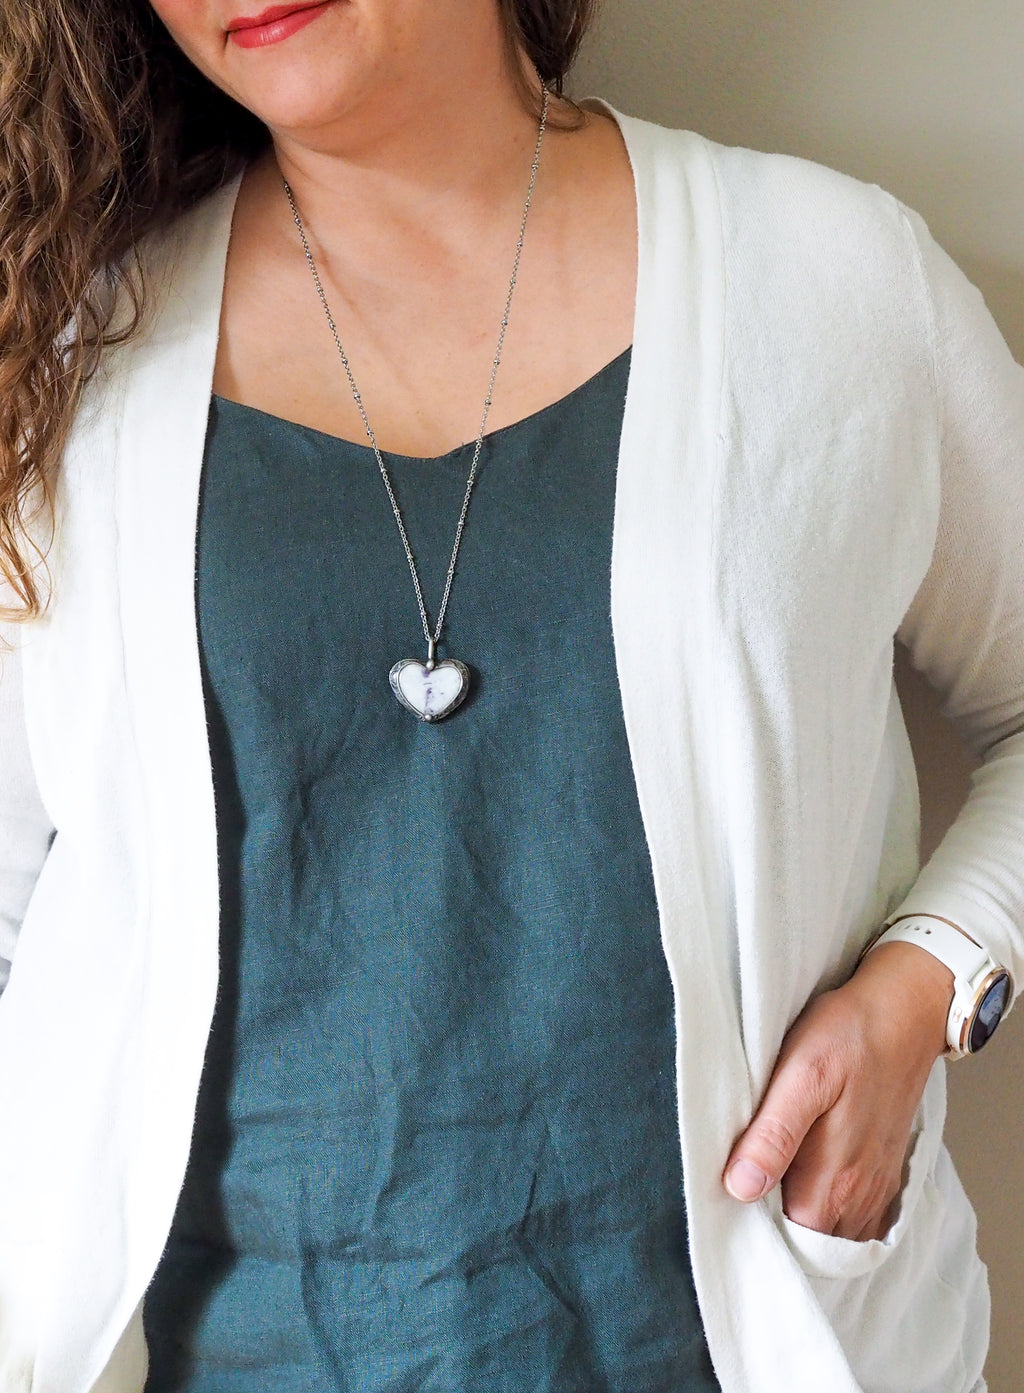 purple and sparkly white heart shaped healing crystal talisman necklace on woman in blue top